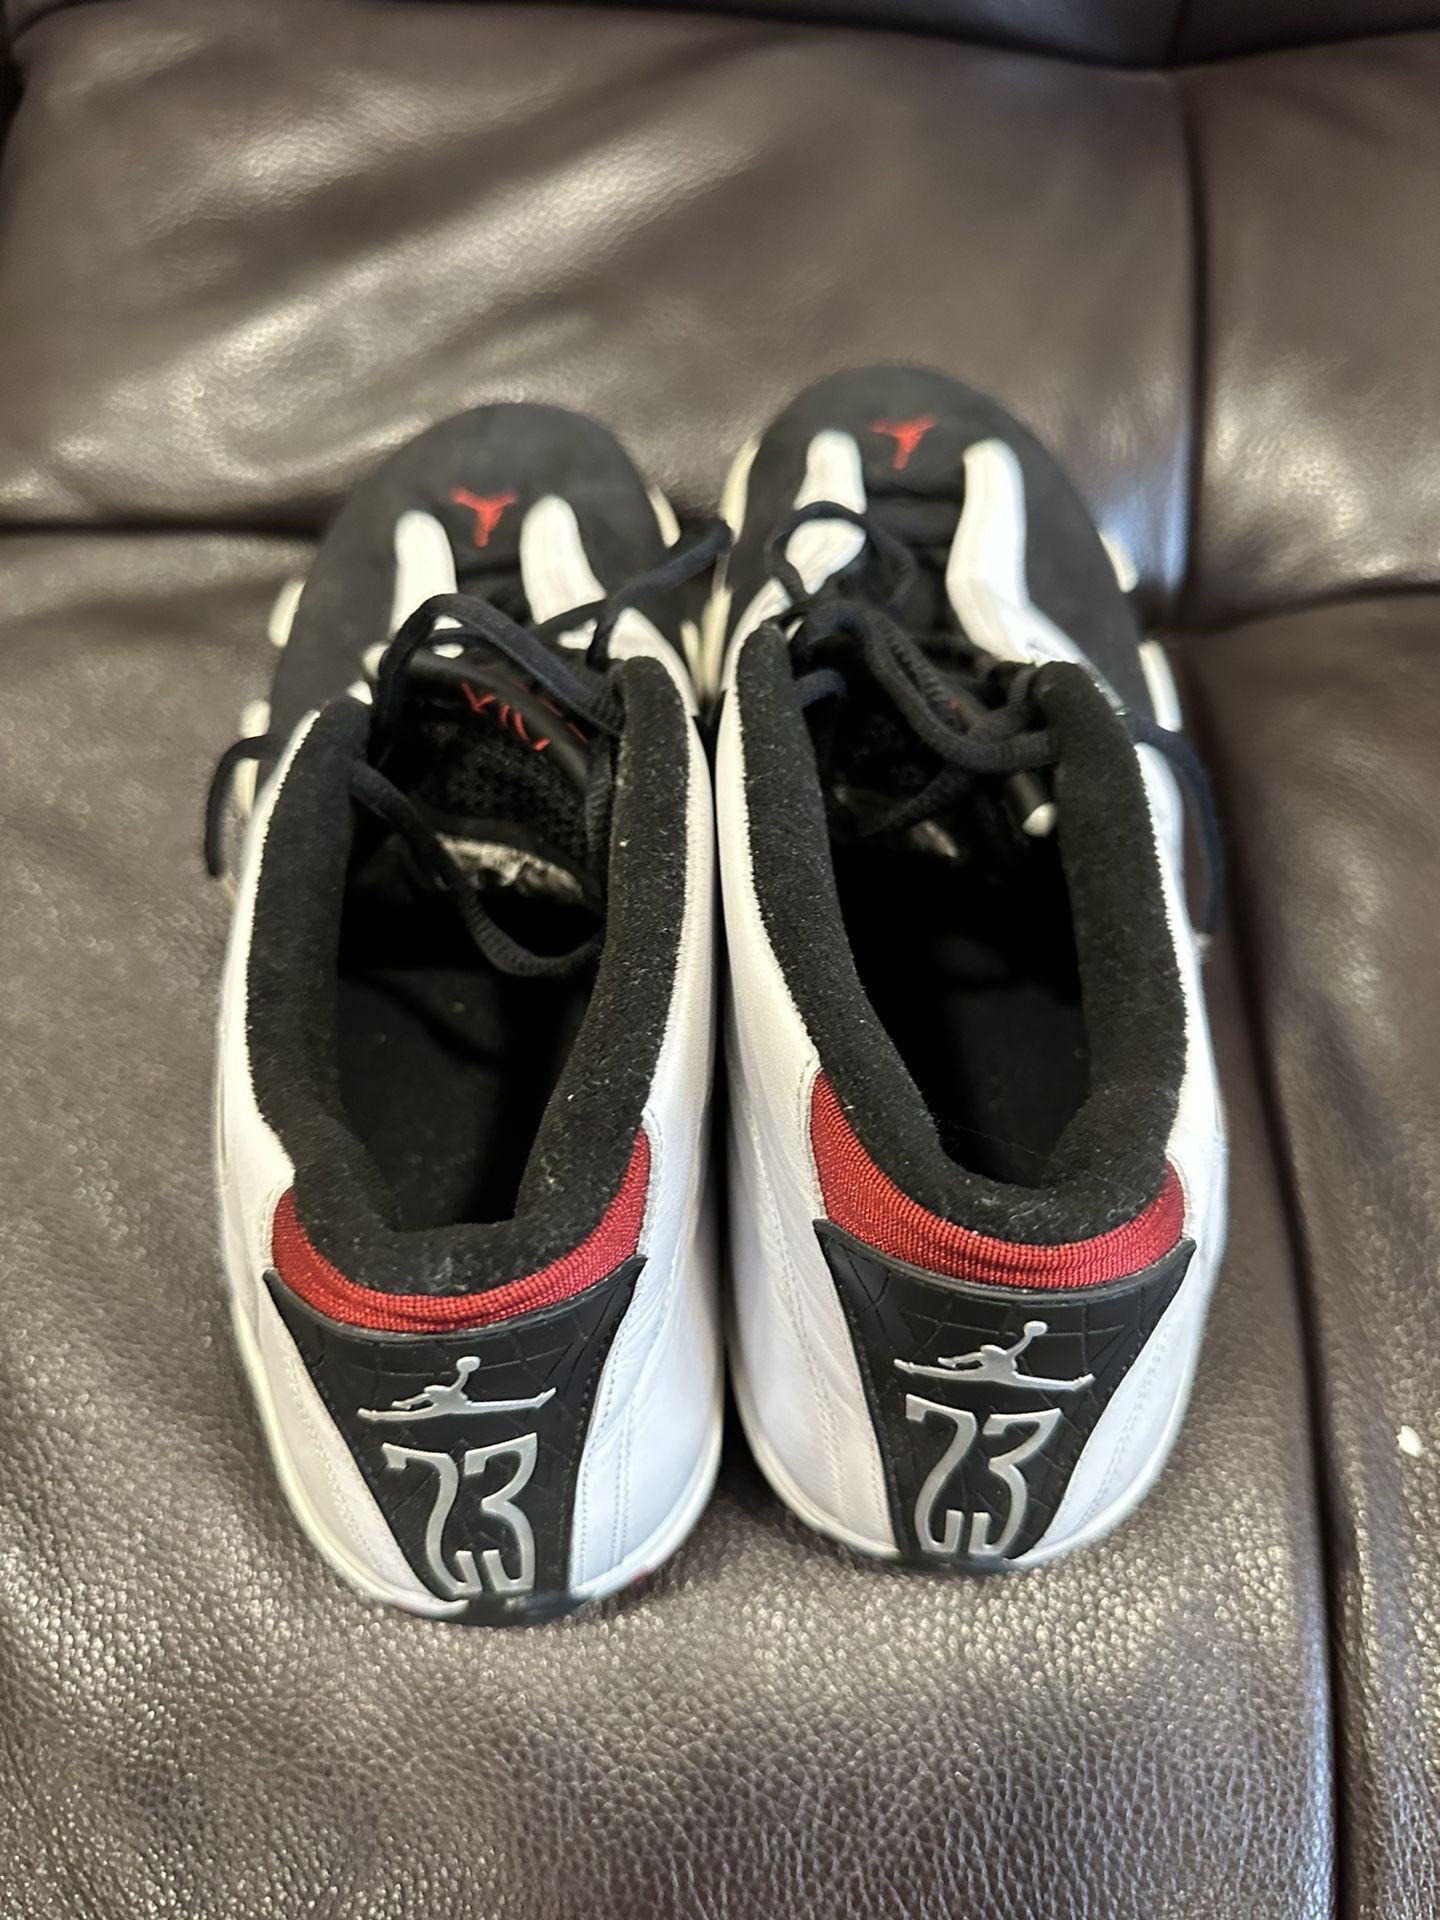 chicago bulls game worn shoes. michael jordan, ron Harper / Steve Kerr/  Luol Deng # 9 Sign Shoes for Sale in Chicago, IL - OfferUp